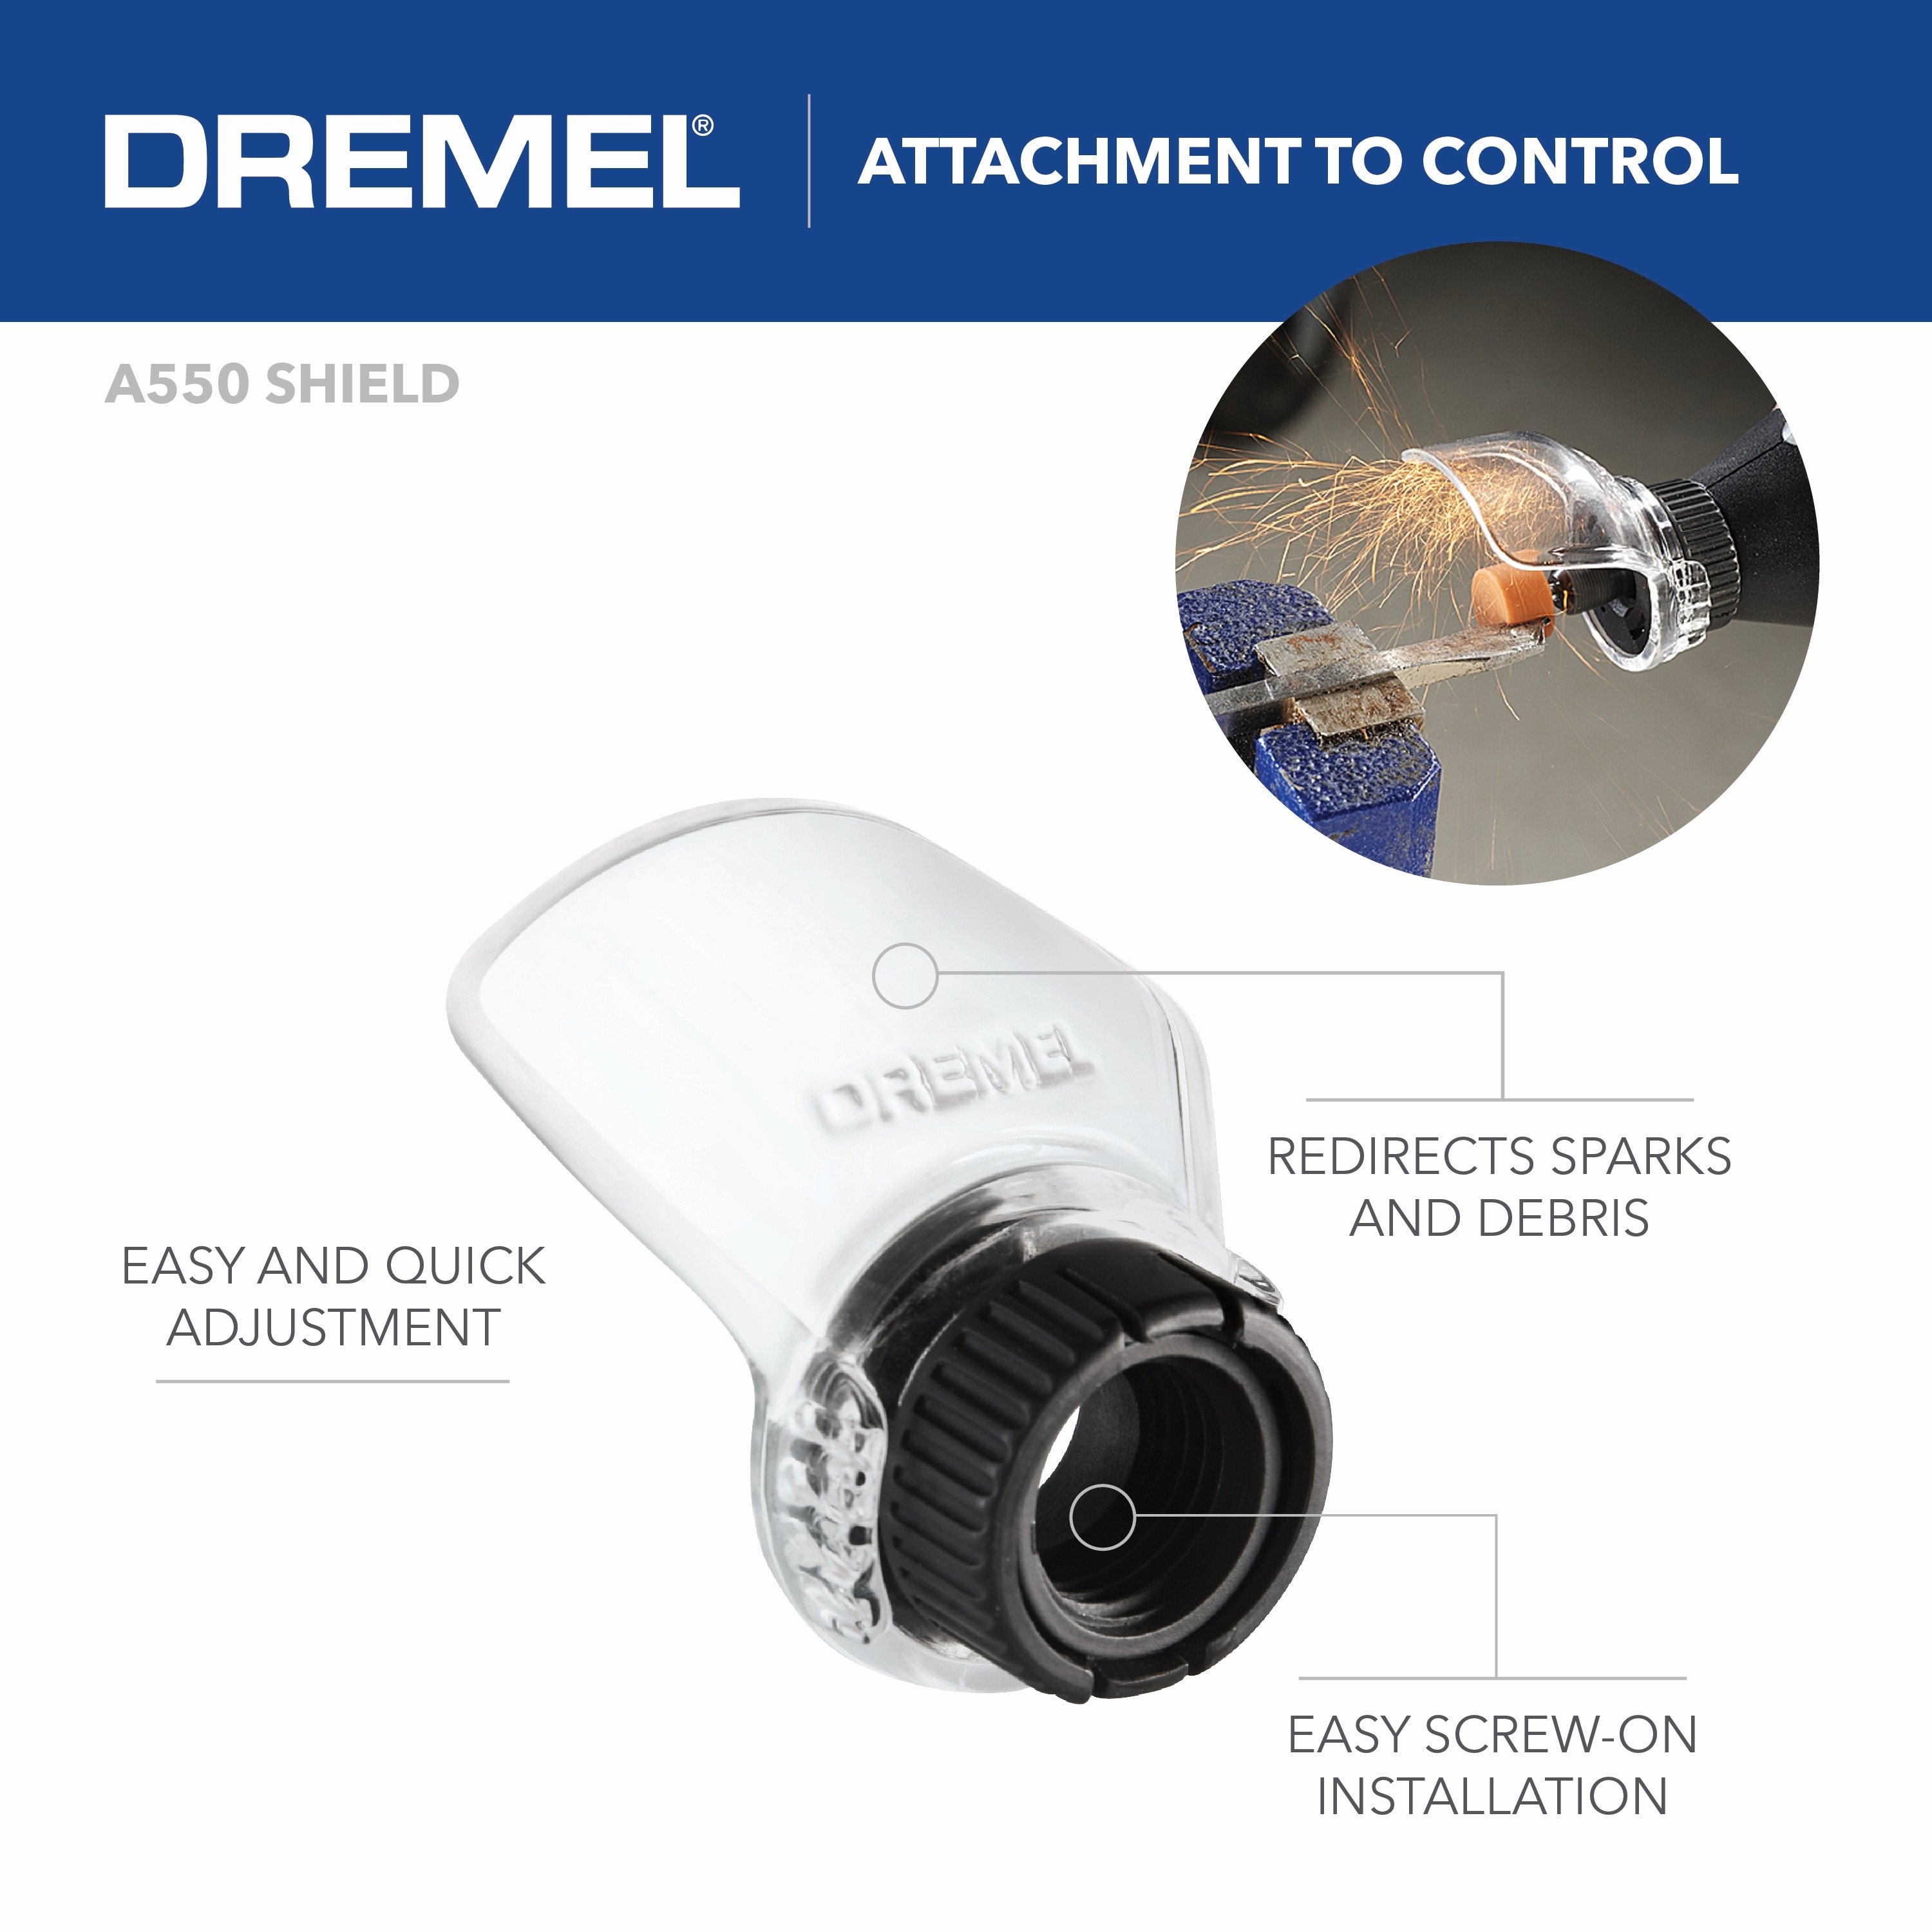 Dremel 4300-9/64 Variable Speed Rotary Tool Kit - 9 Attachments and 64